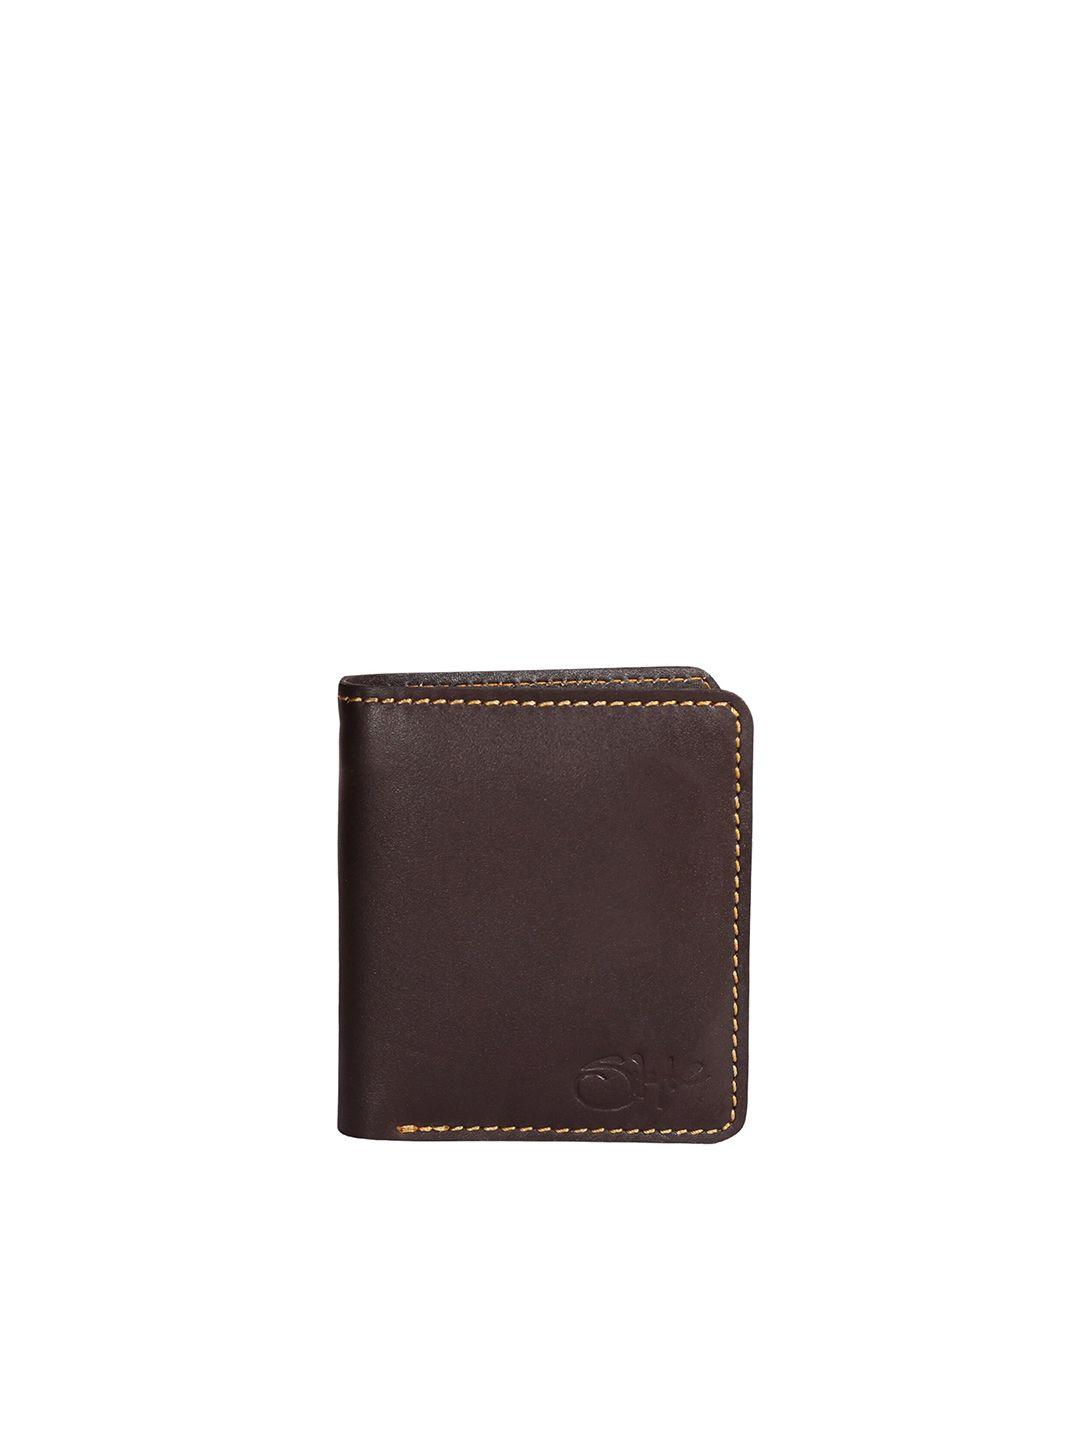 style shoes unisex brown leather two fold rfid wallet